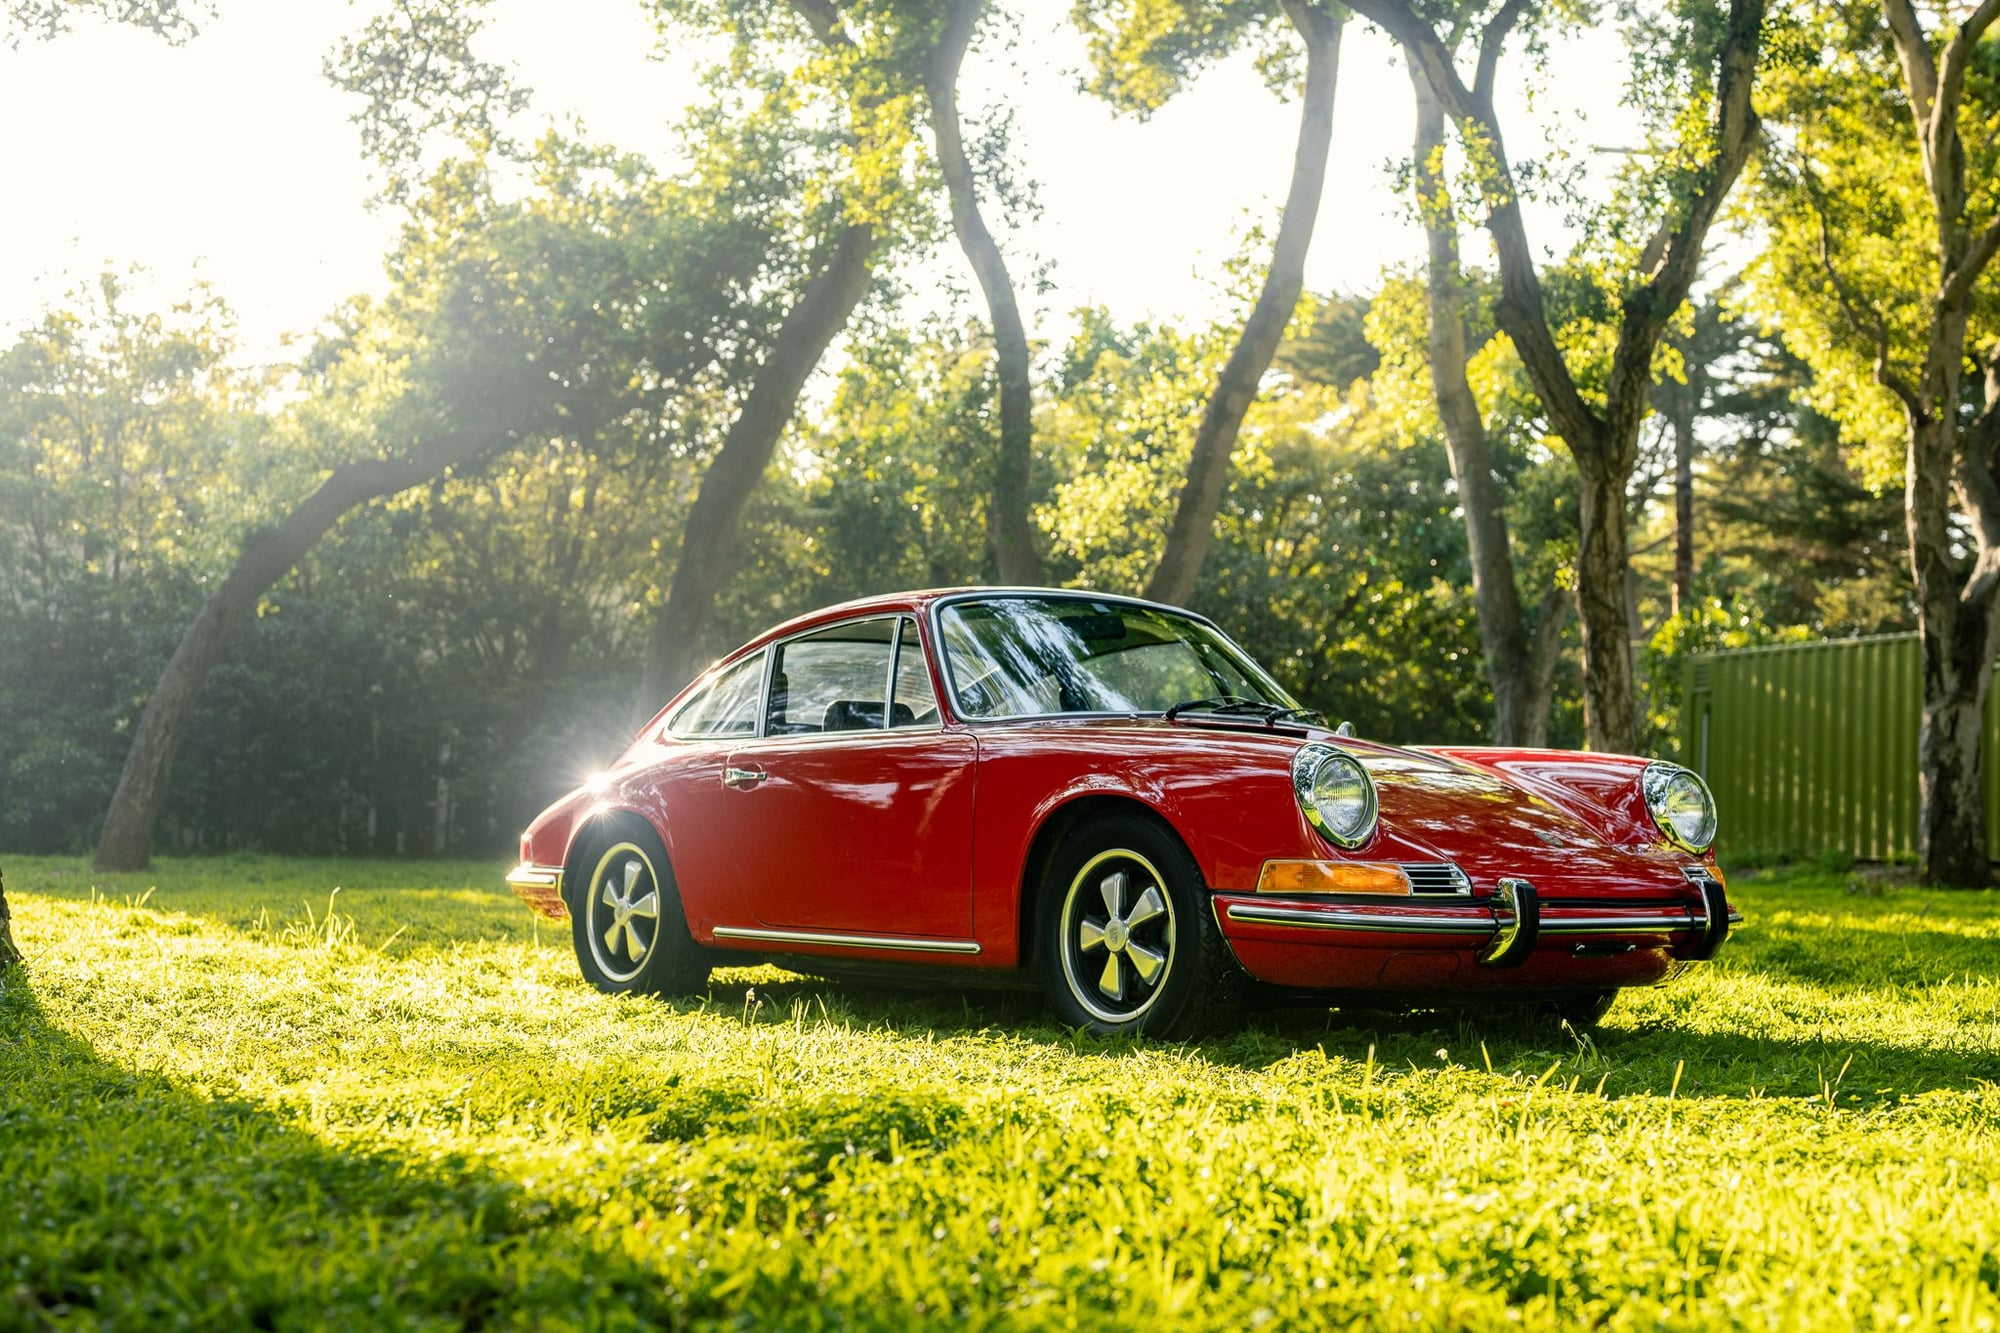 1969 Porsche 911 - 1969 Porsche 911T in outstanding condition. Polo Red over Black interior. - Used - VIN 119120346 - 79,000 Miles - 6 cyl - 2WD - Manual - Coupe - Red - Montecito, CA 93108, United States